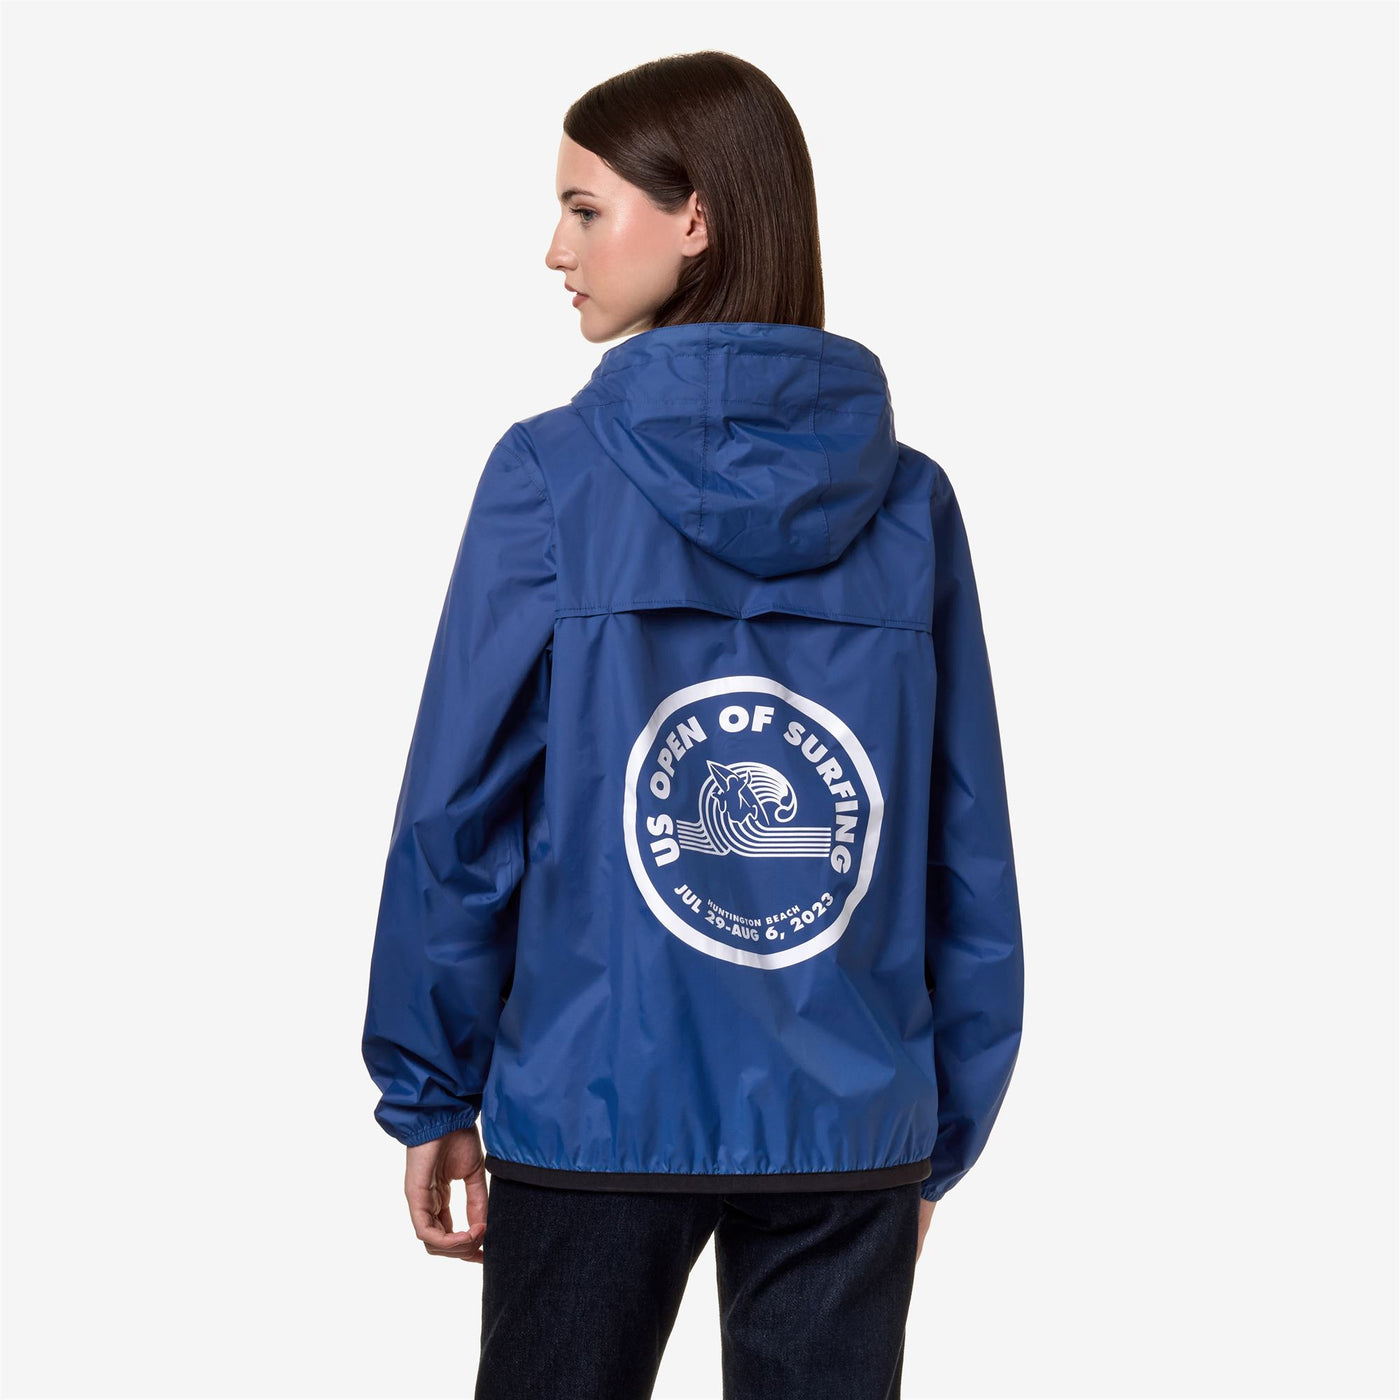 Jackets Unisex LE VRAI 3.0 CLAUDE CDG OPEN US OF SURFING Mid BLUE ROYAL MARINE Dressed Front Double		